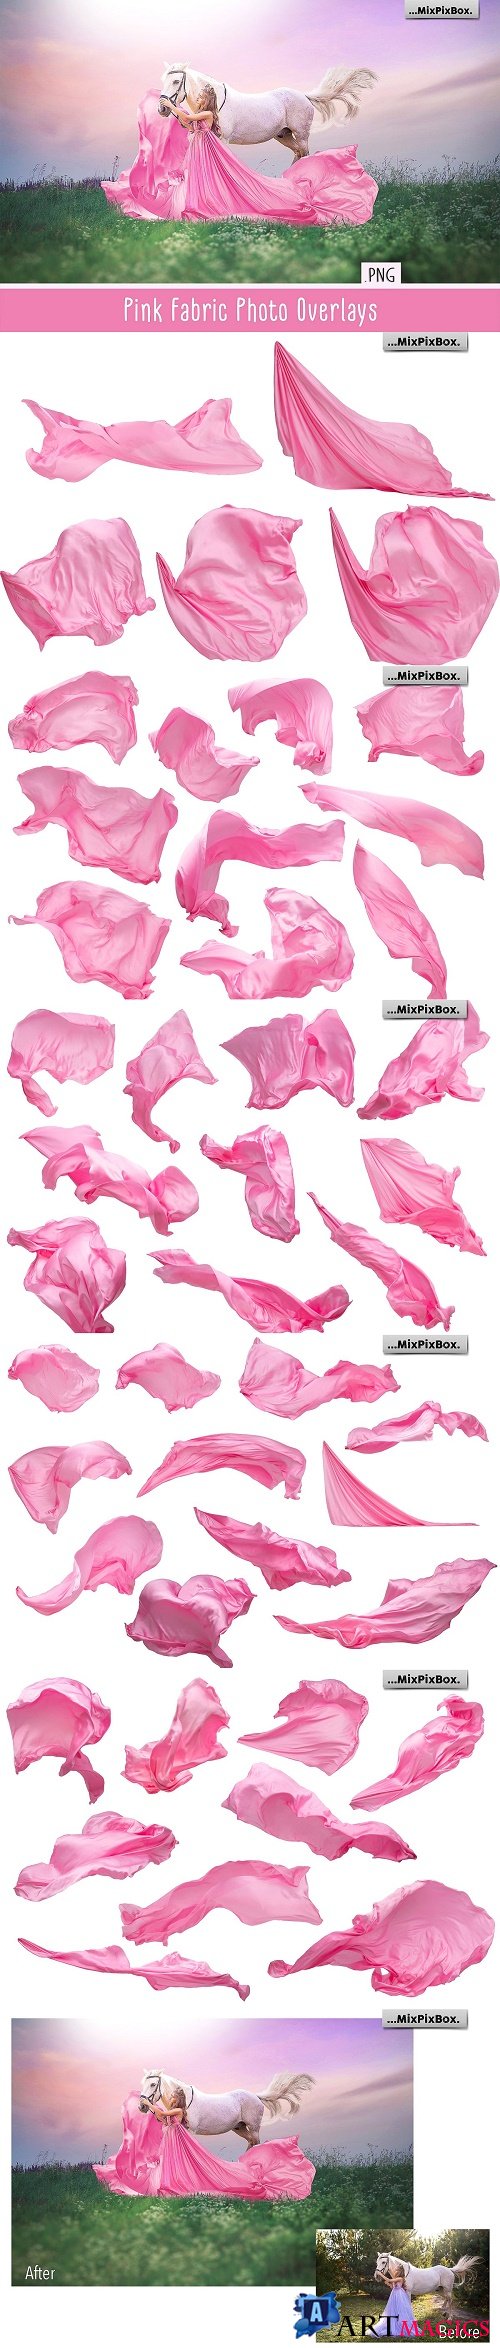 Pink Flying Fabric Photo Overlays - 4177211